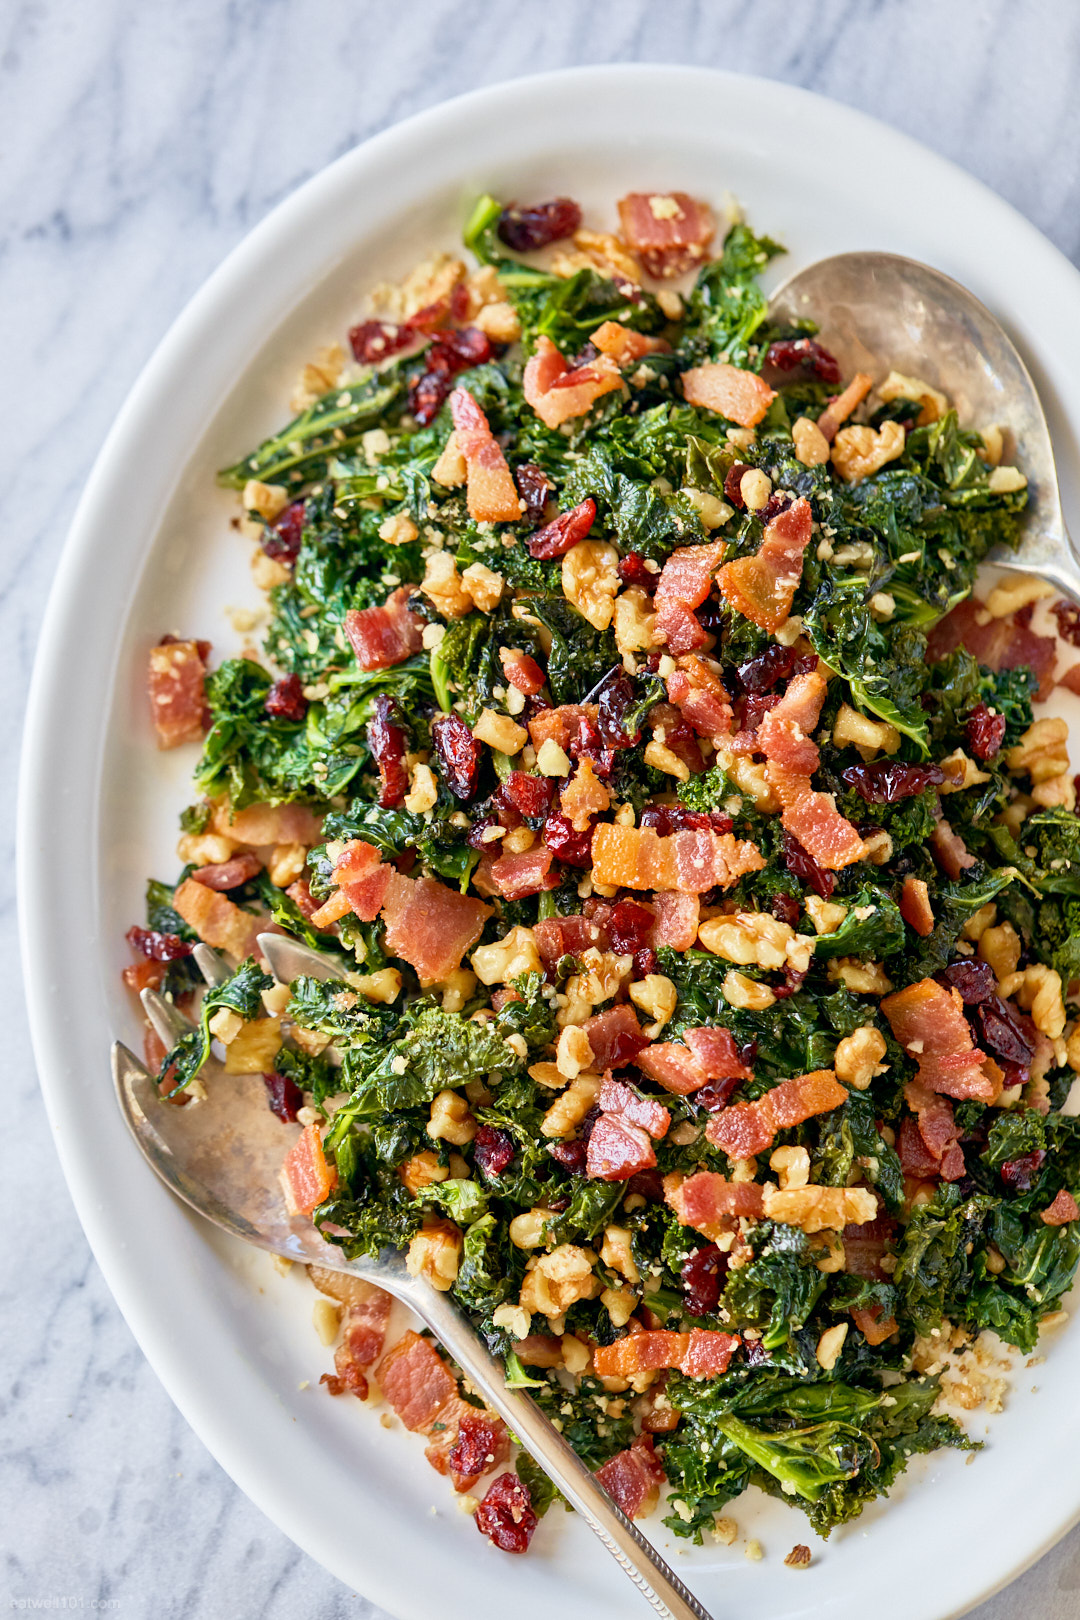 Healthy Sautéed Kale Salad Recipe with Bacon, Walnuts and Cranberries